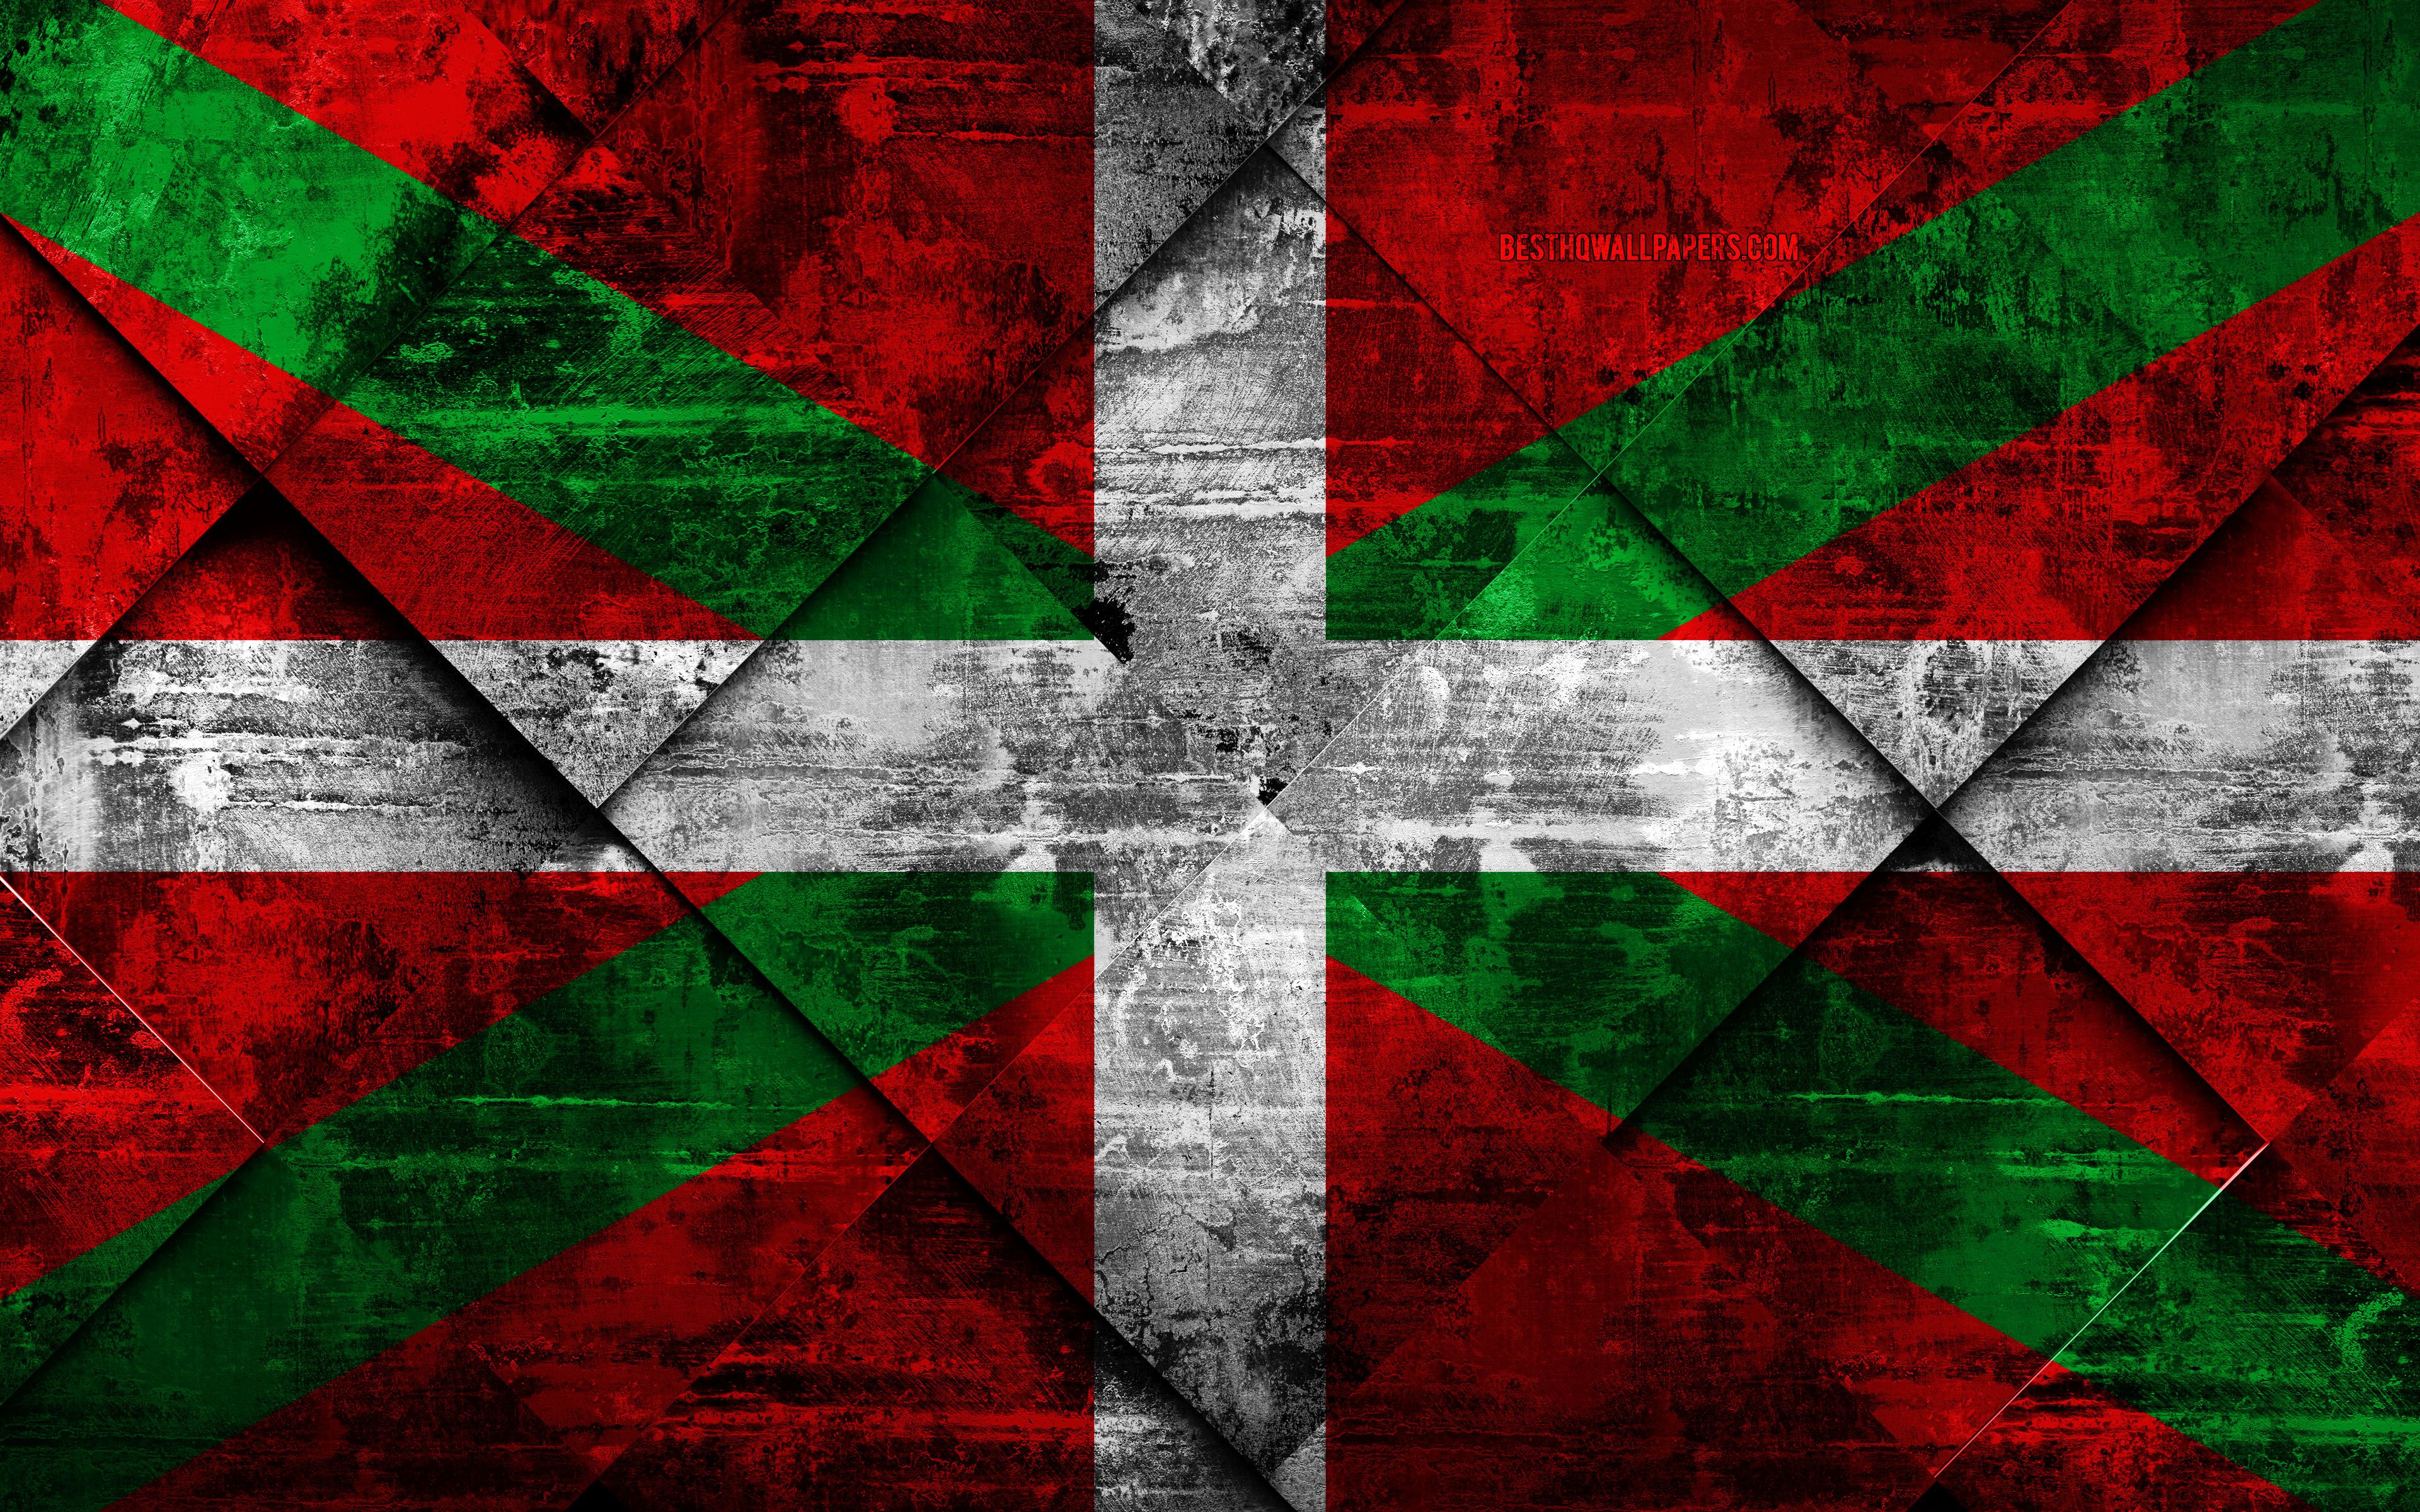 Download wallpaper Flag of Basque Country, grunge art, rhombus grunge texture, Spanish autonomous community, Basque Country flag, Spain, Basque Country, Communities of Spain, creative art for desktop with resolution 3840x2400. High Quality